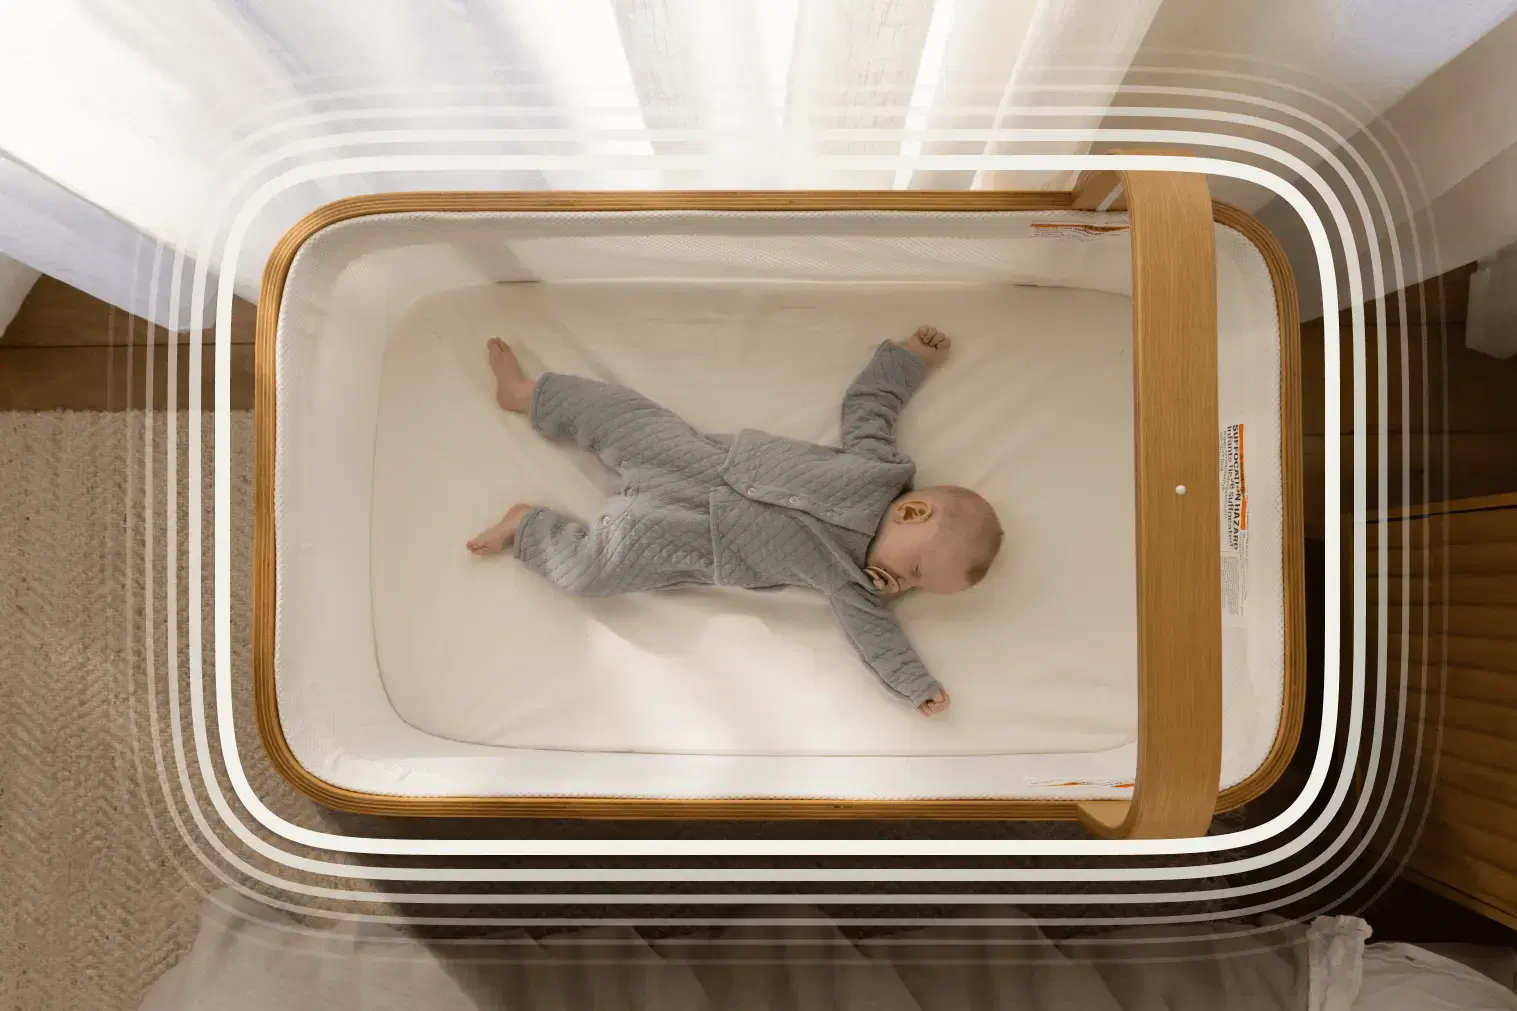 Cradlewise Review: The smart crib, is it worth the cost though?